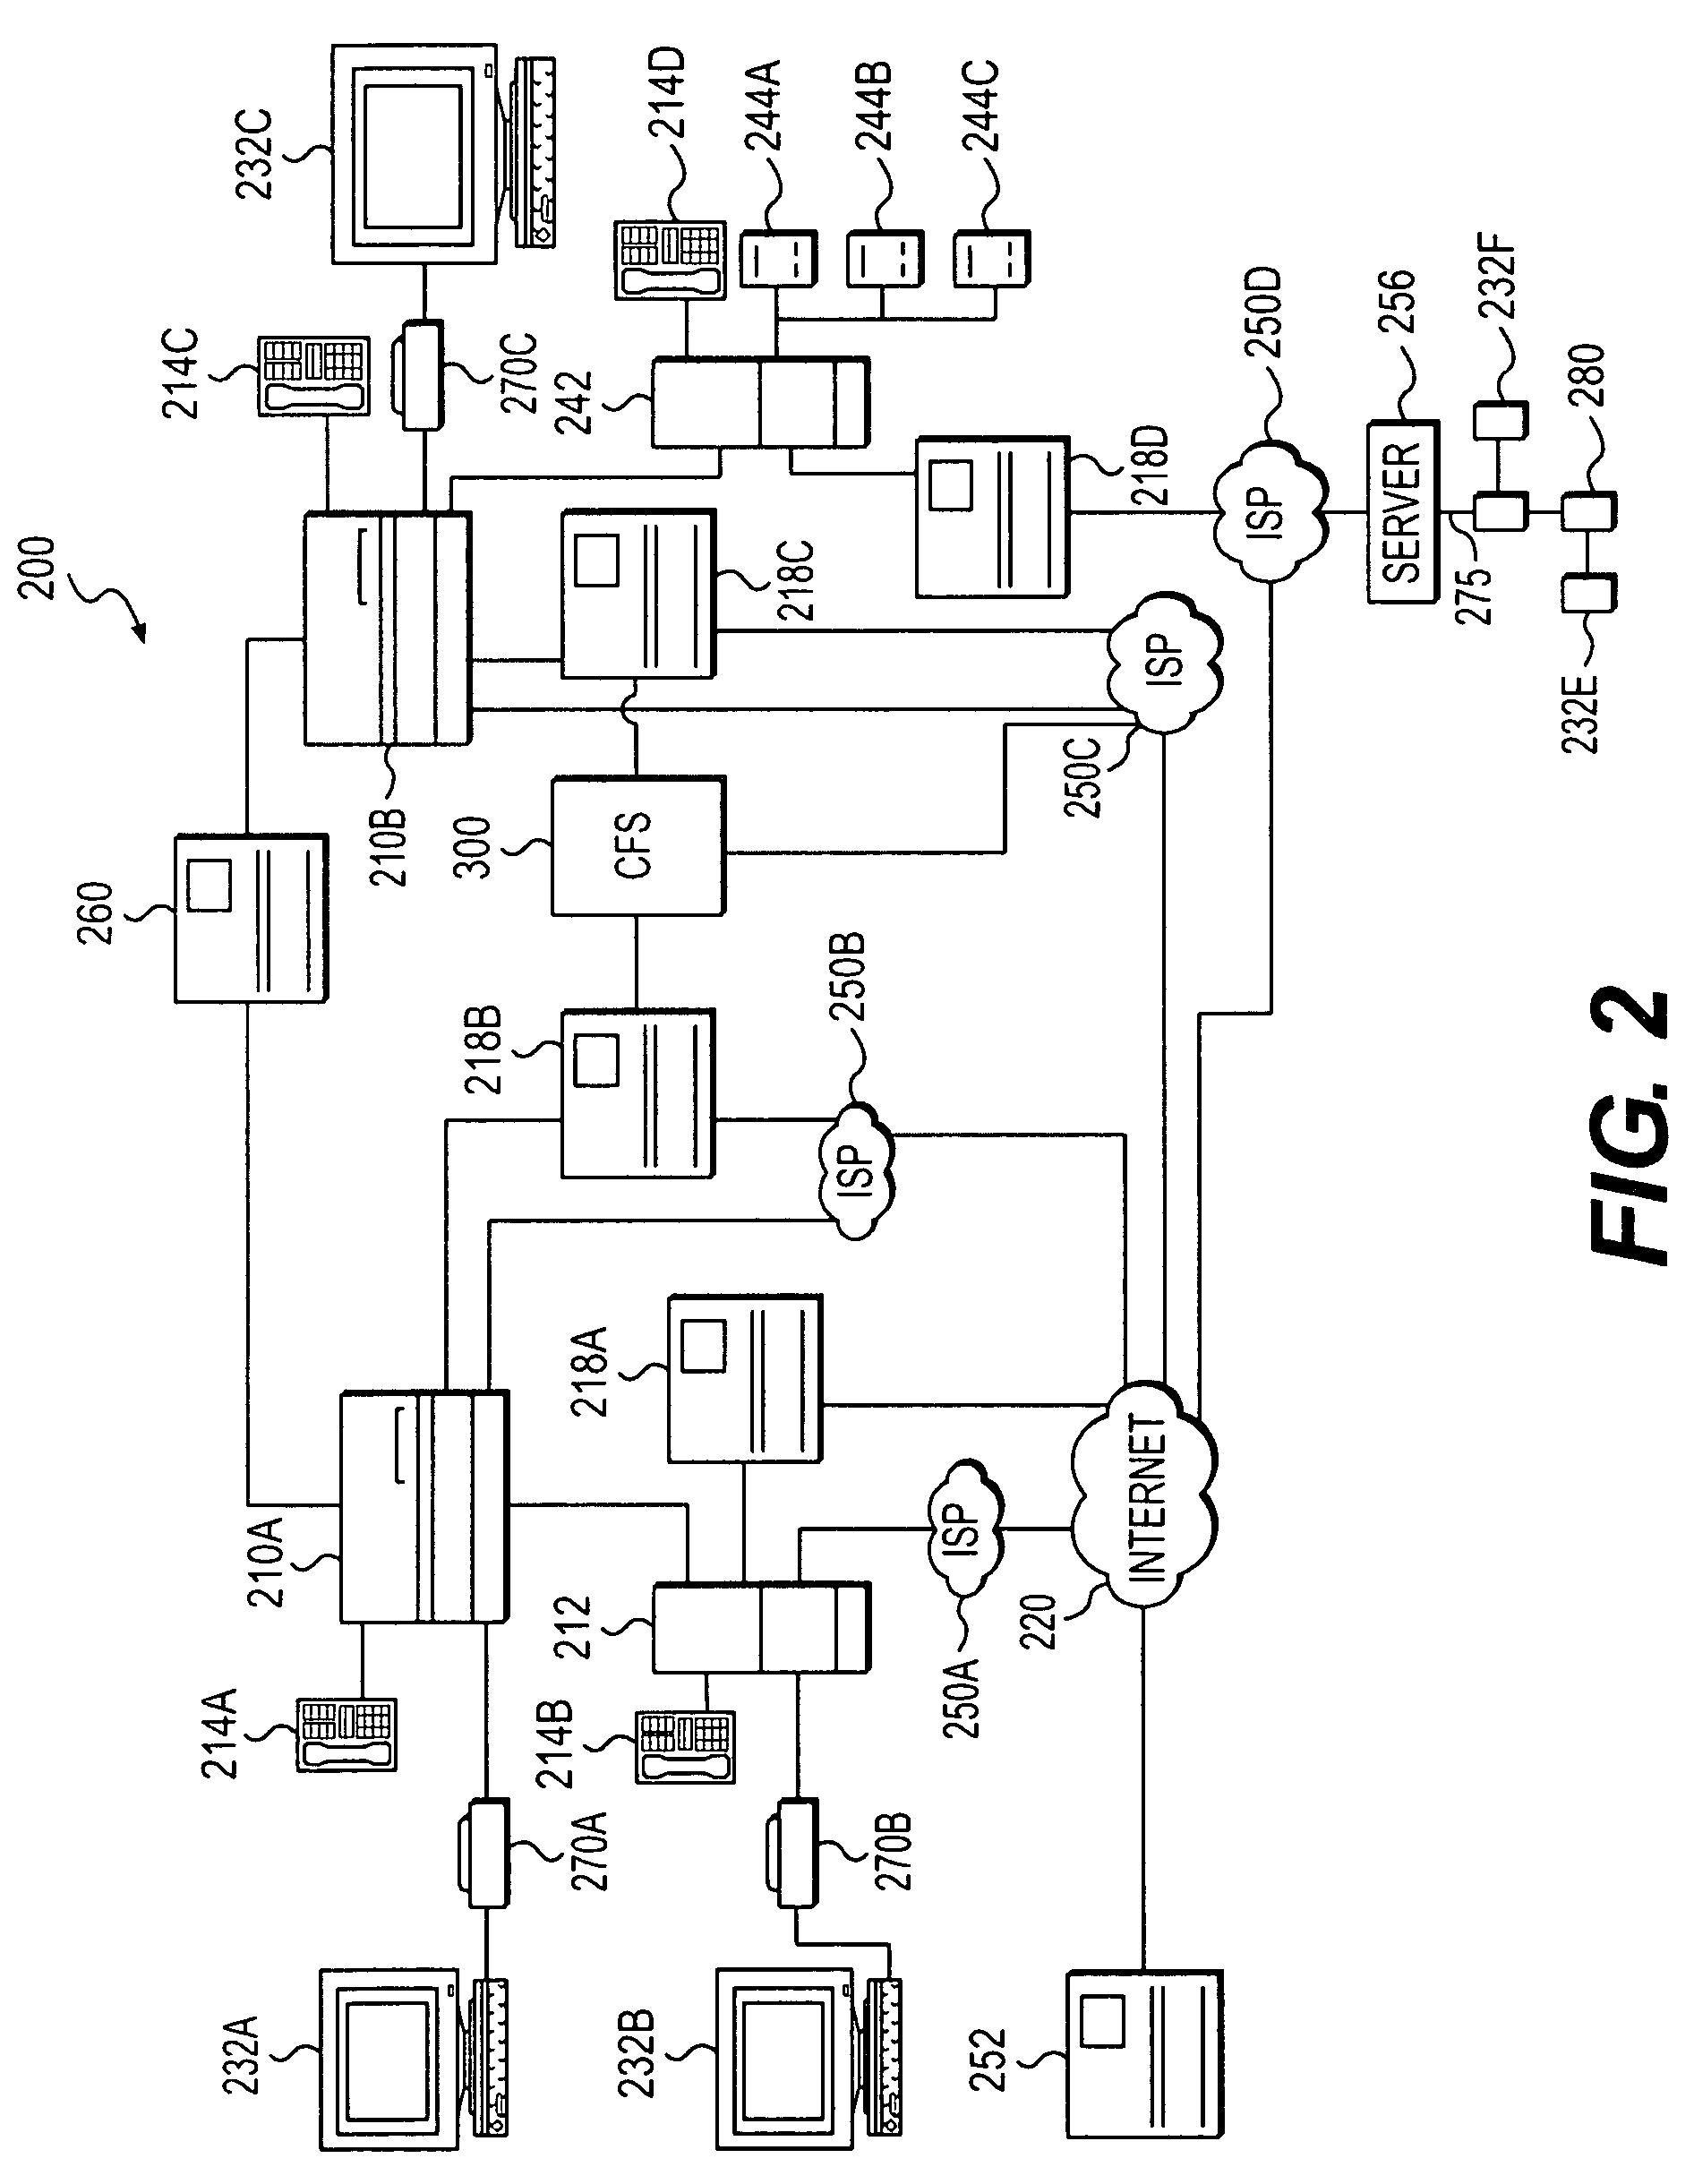 Method and apparatus for dynamically balancing call flow workloads in a telecommunications system